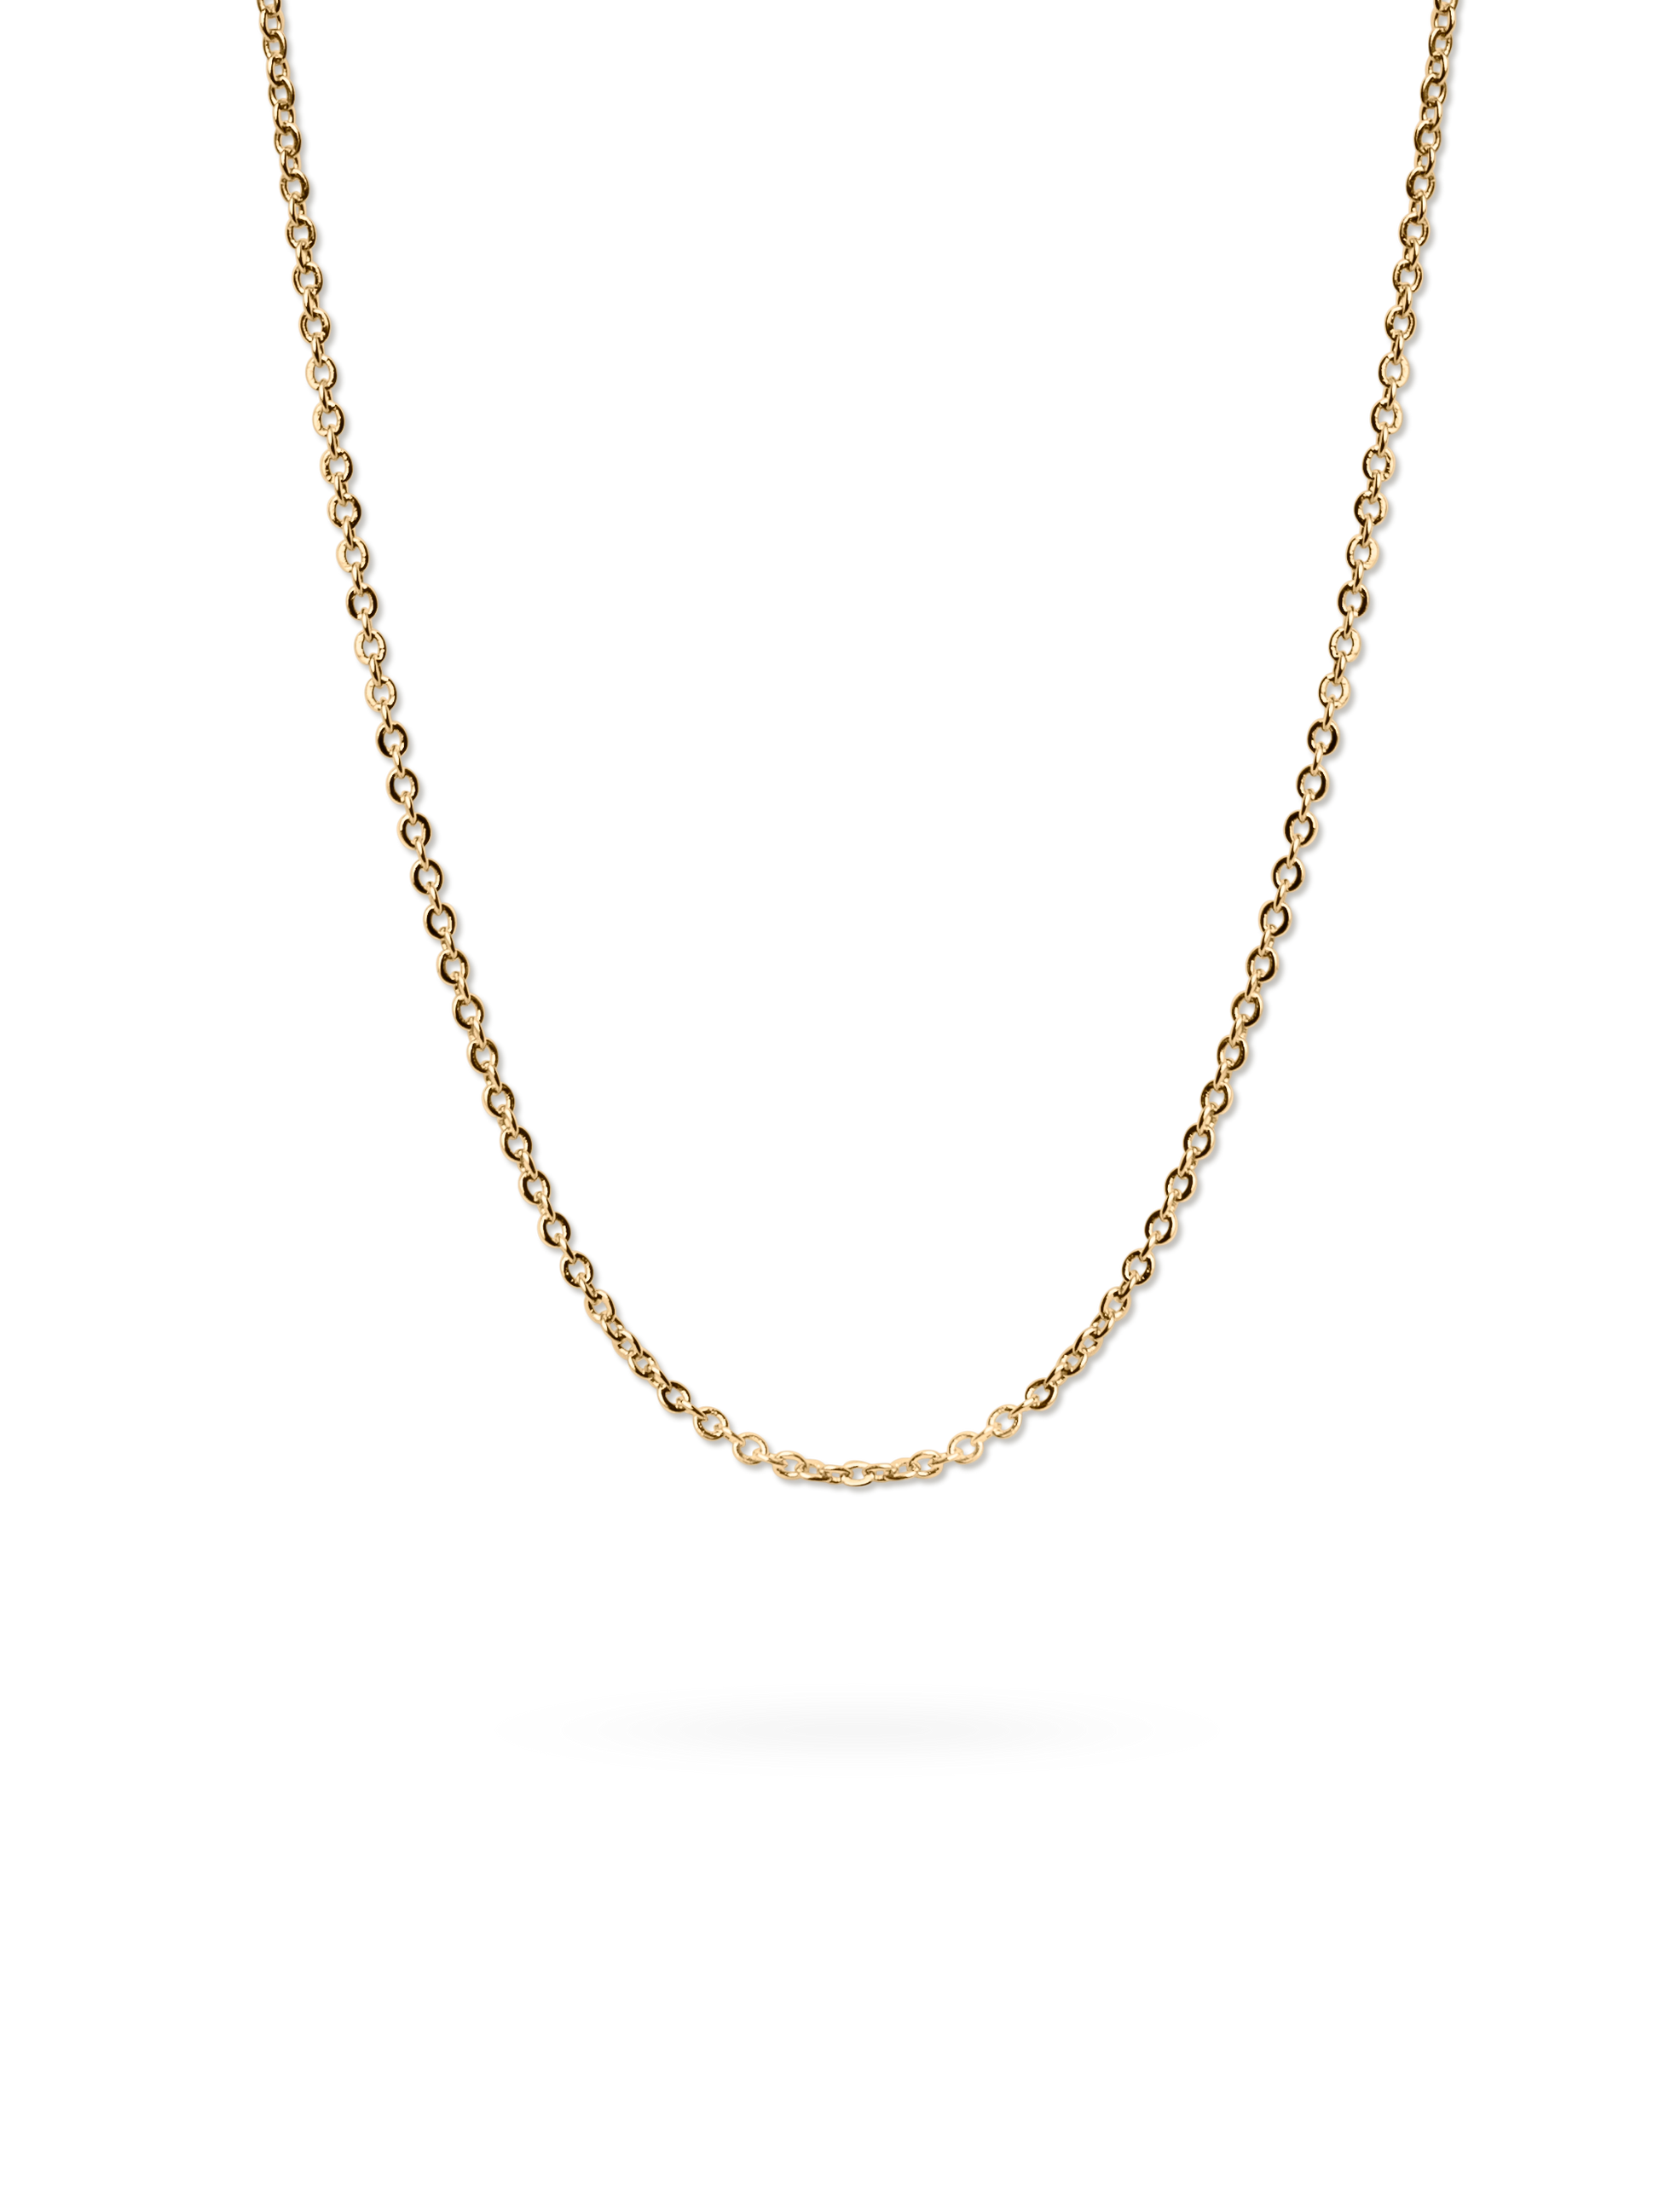 Belcher necklace made in 18k gold plated brass